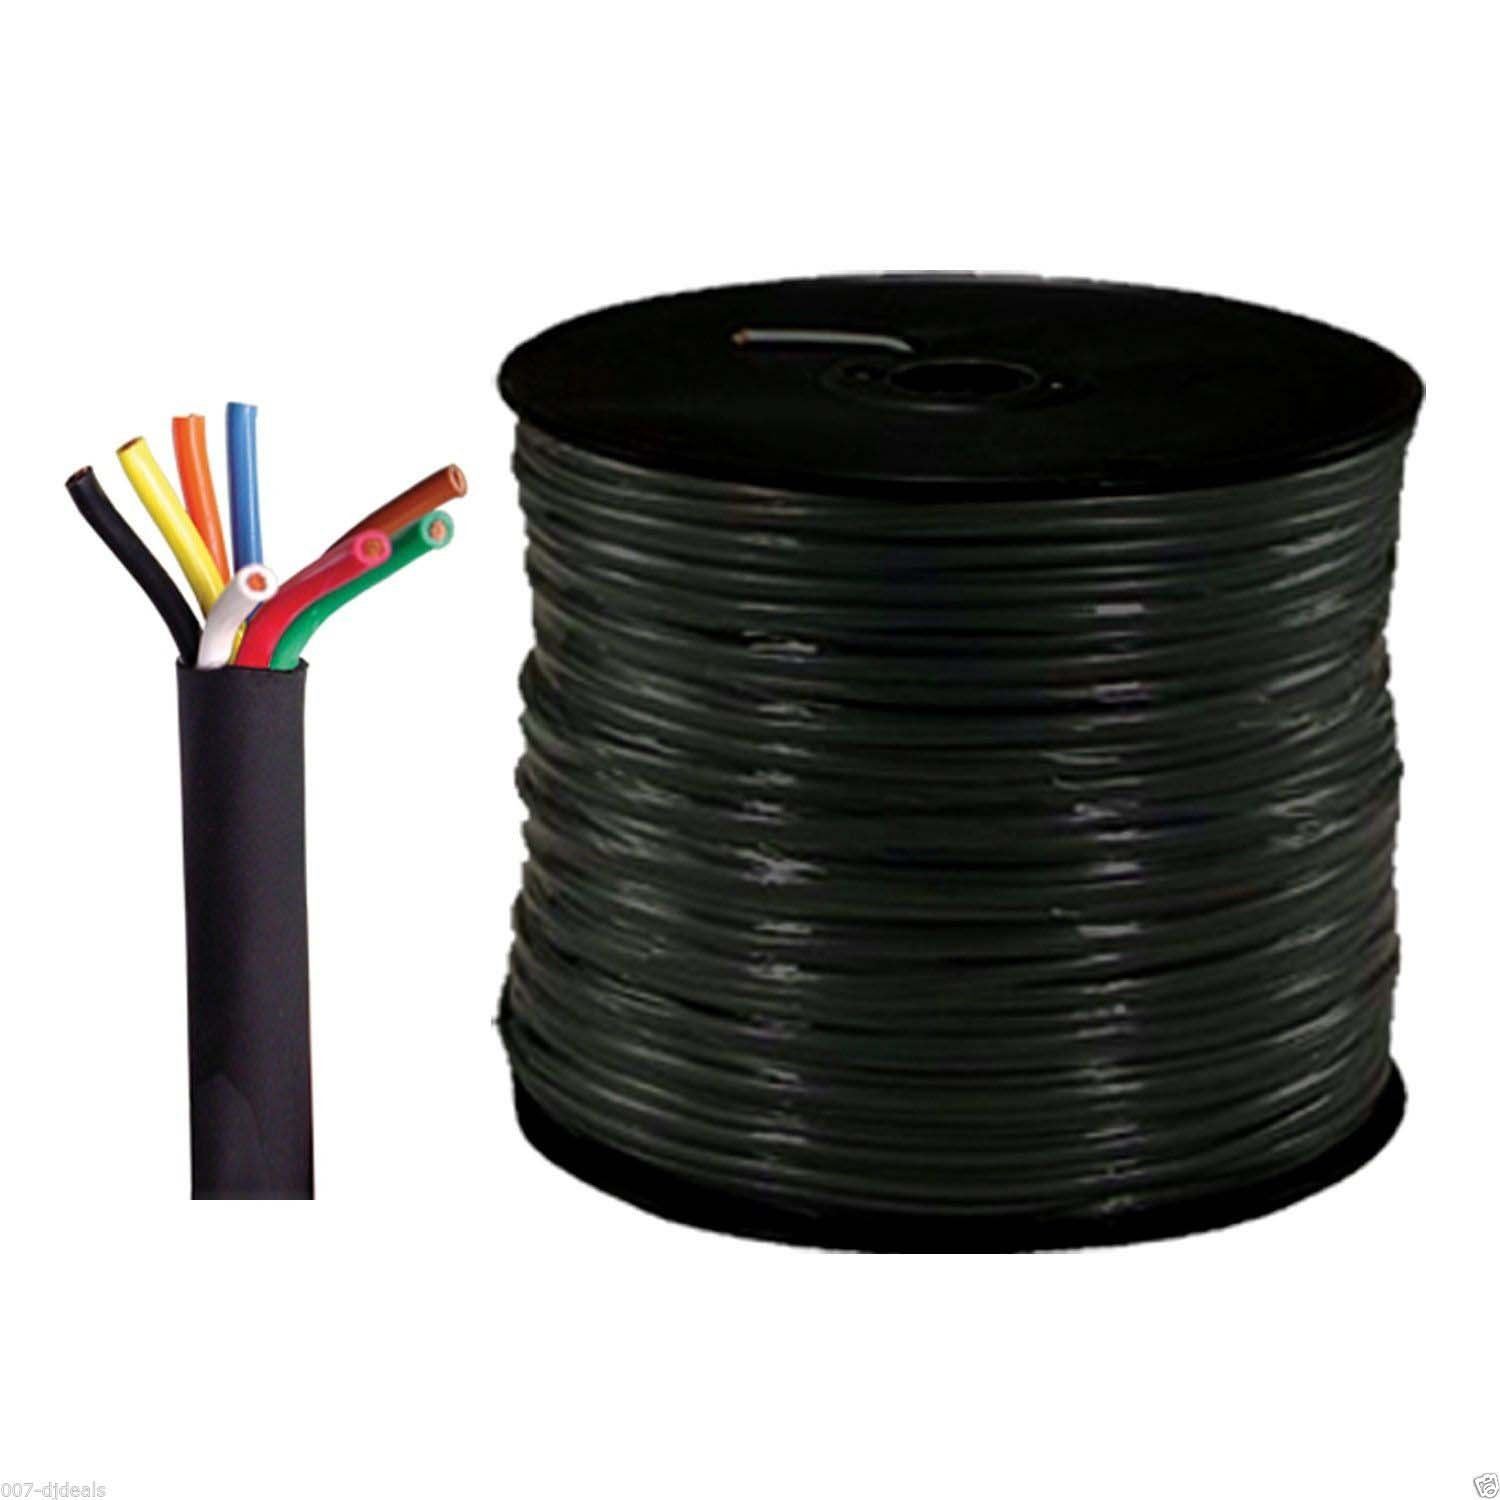 prox-xc-812-500--500ft-spool-12-gauge-8-conductor-cable.jpg